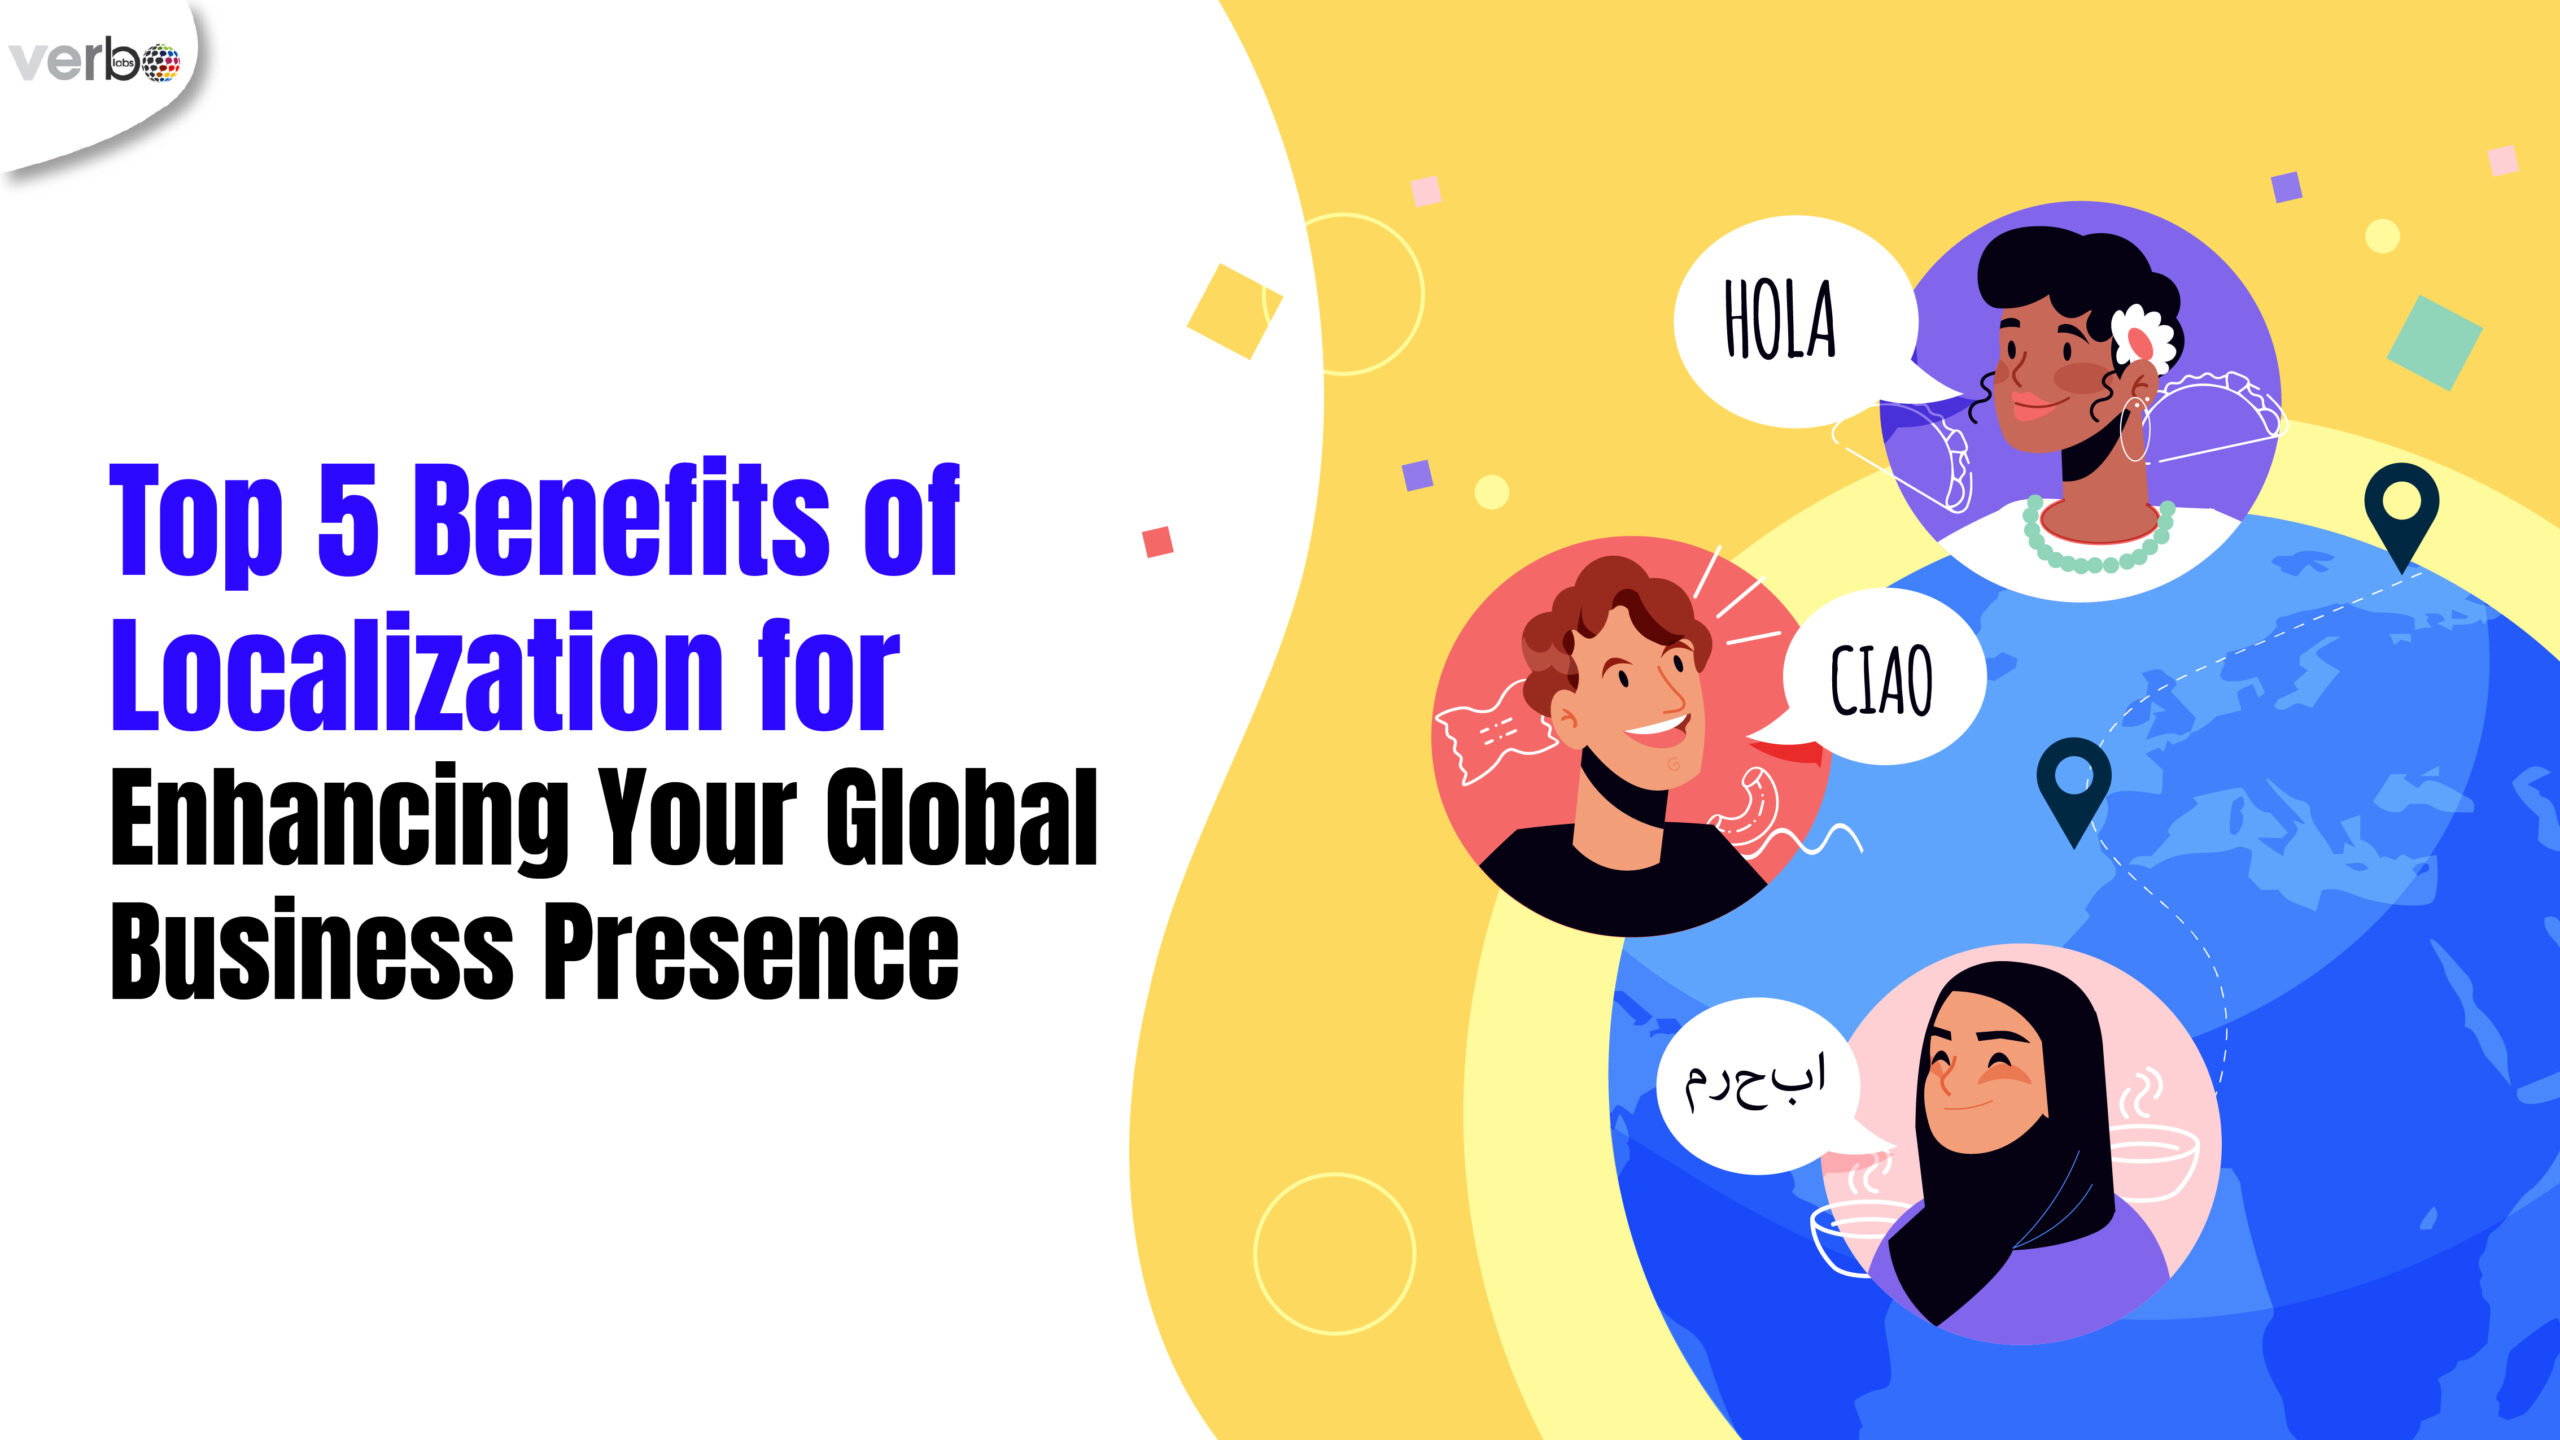 Top 5 benefits of localization for enhancing your global business